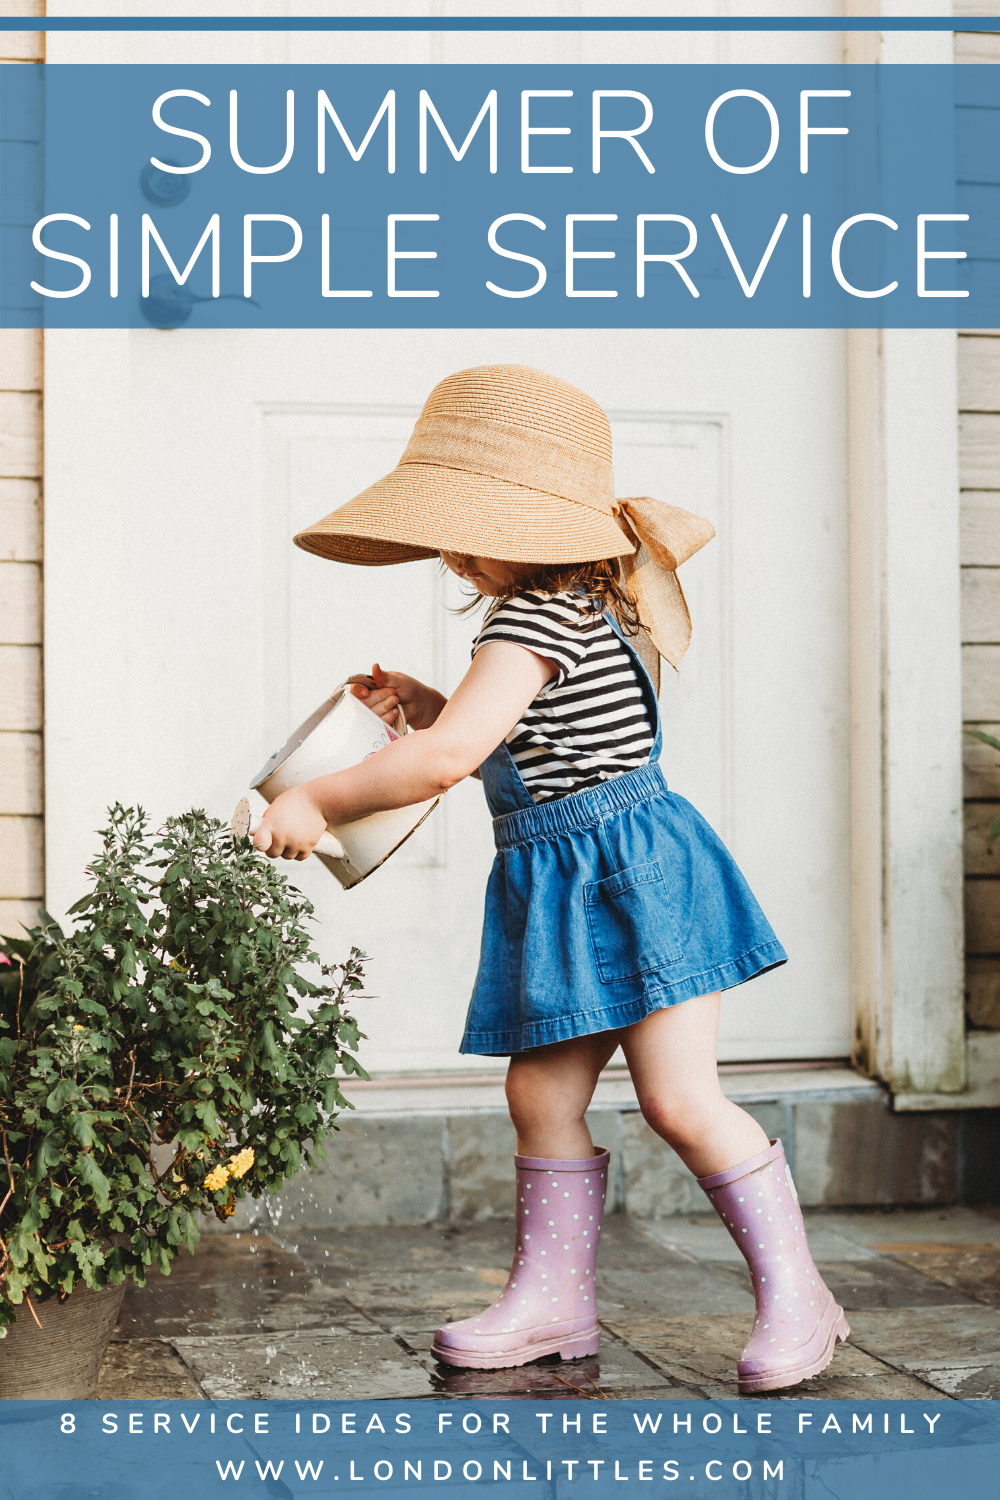 simple service activities for the whole family